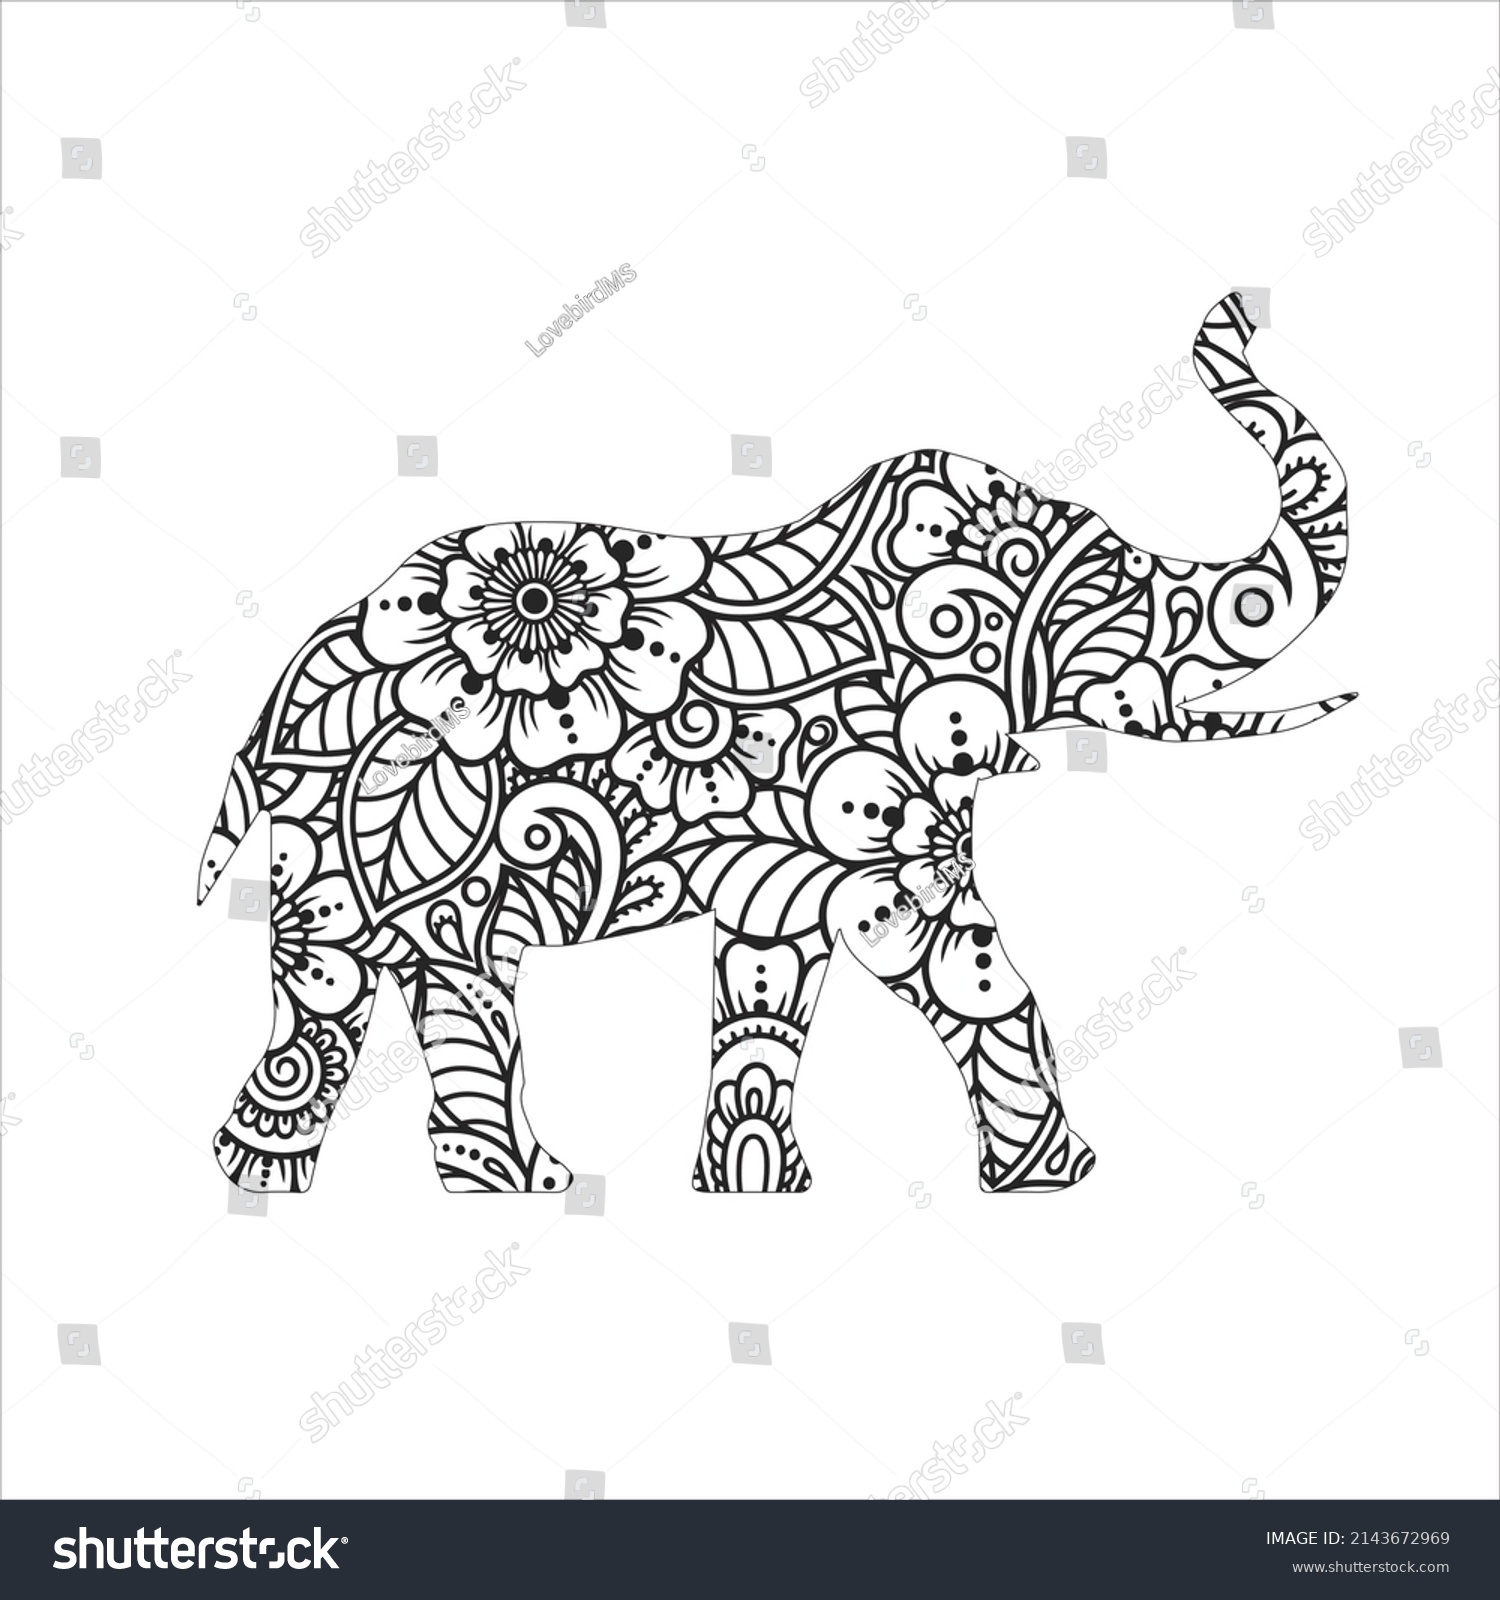 SVG of Elephant card. Frame of animal made in vector. Illustration for design, pattern Hand drawn with Elephant and mandala. Use for children clothes, t shirt designs ,Decorative elephant illustration svg